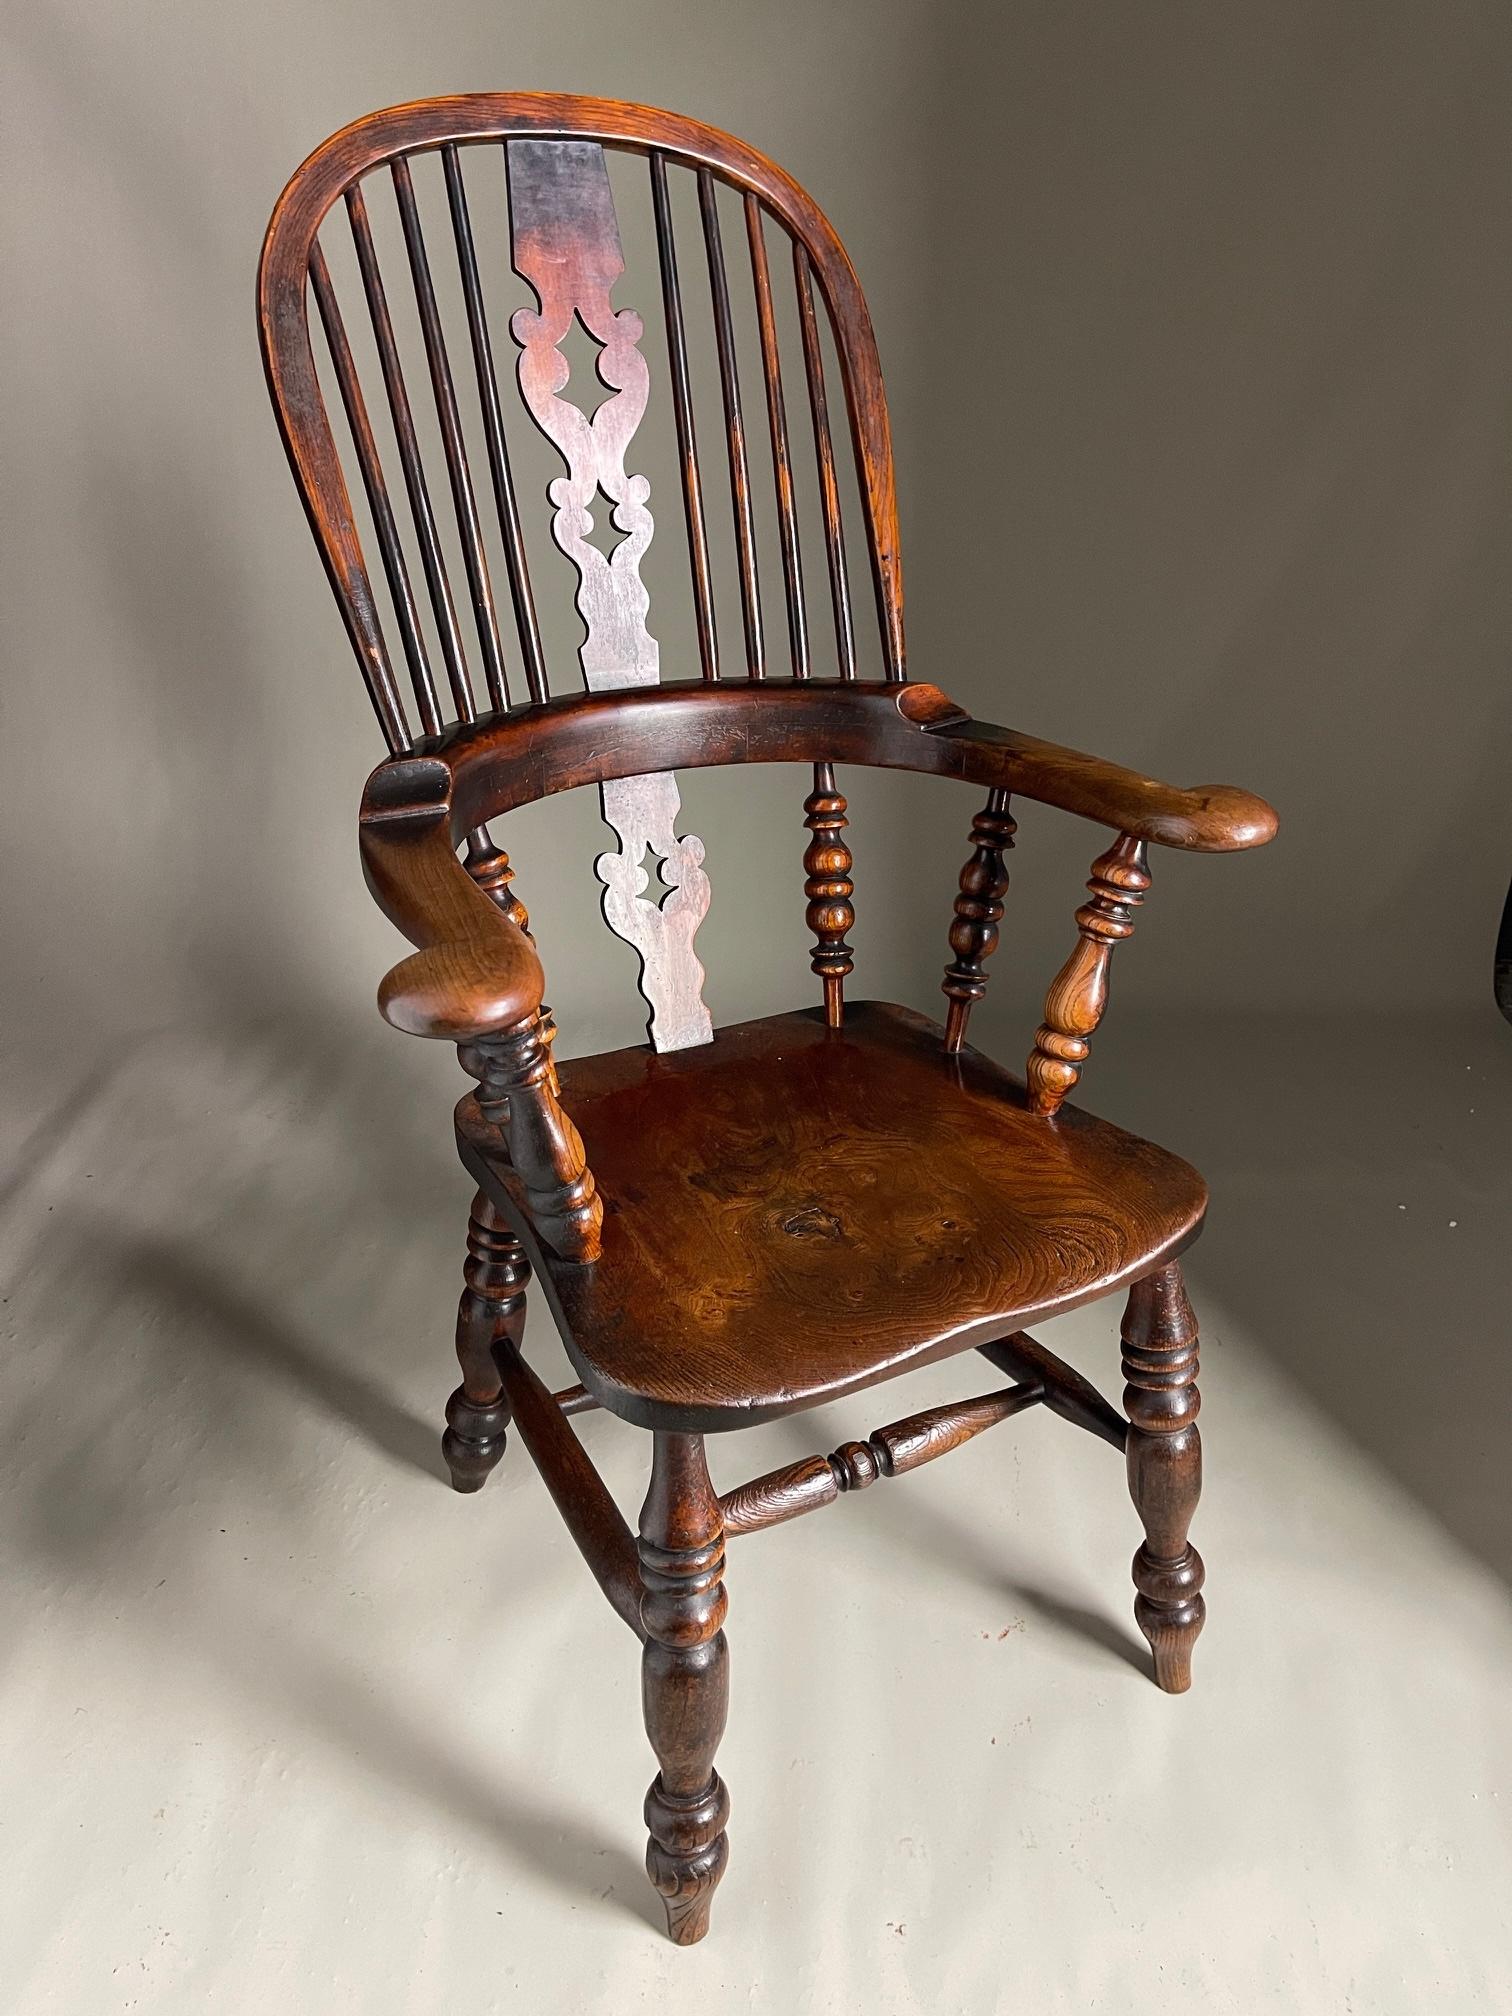 Windsor chair English c1840 in excellent condition with broad arms and very good colour 

116cms high 
67cm across arms
65cms deep
 seat 47cms 
